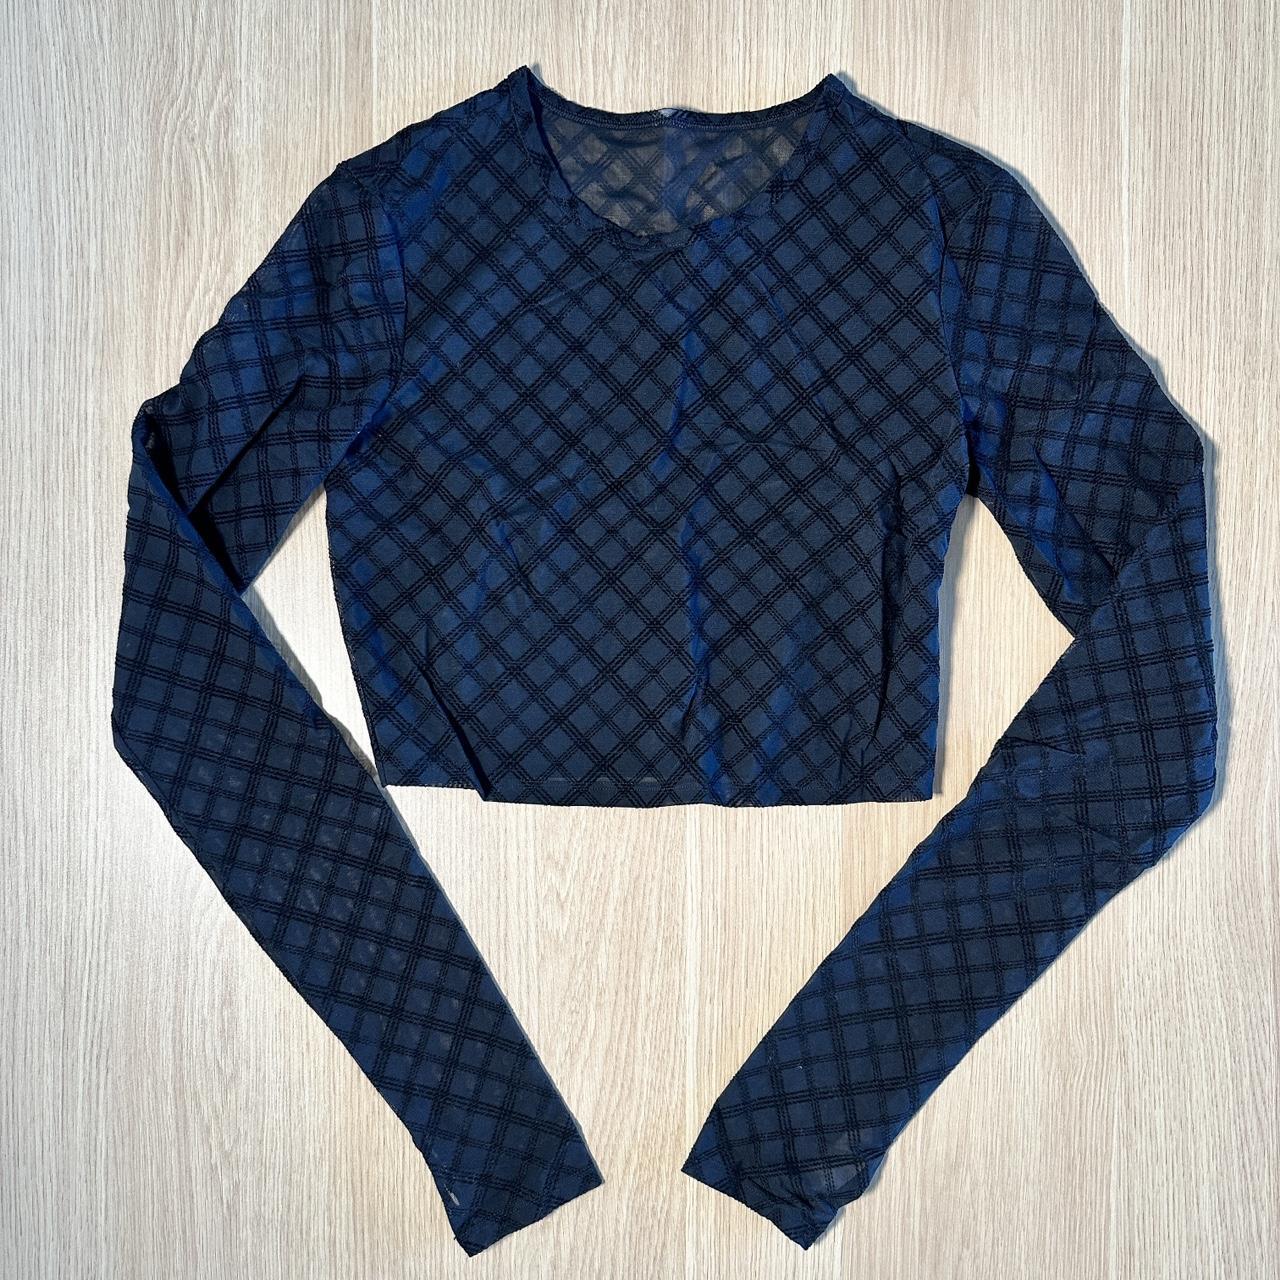 *Alo Yoga Mesh Plaid Cropped Long Sleeve Top in